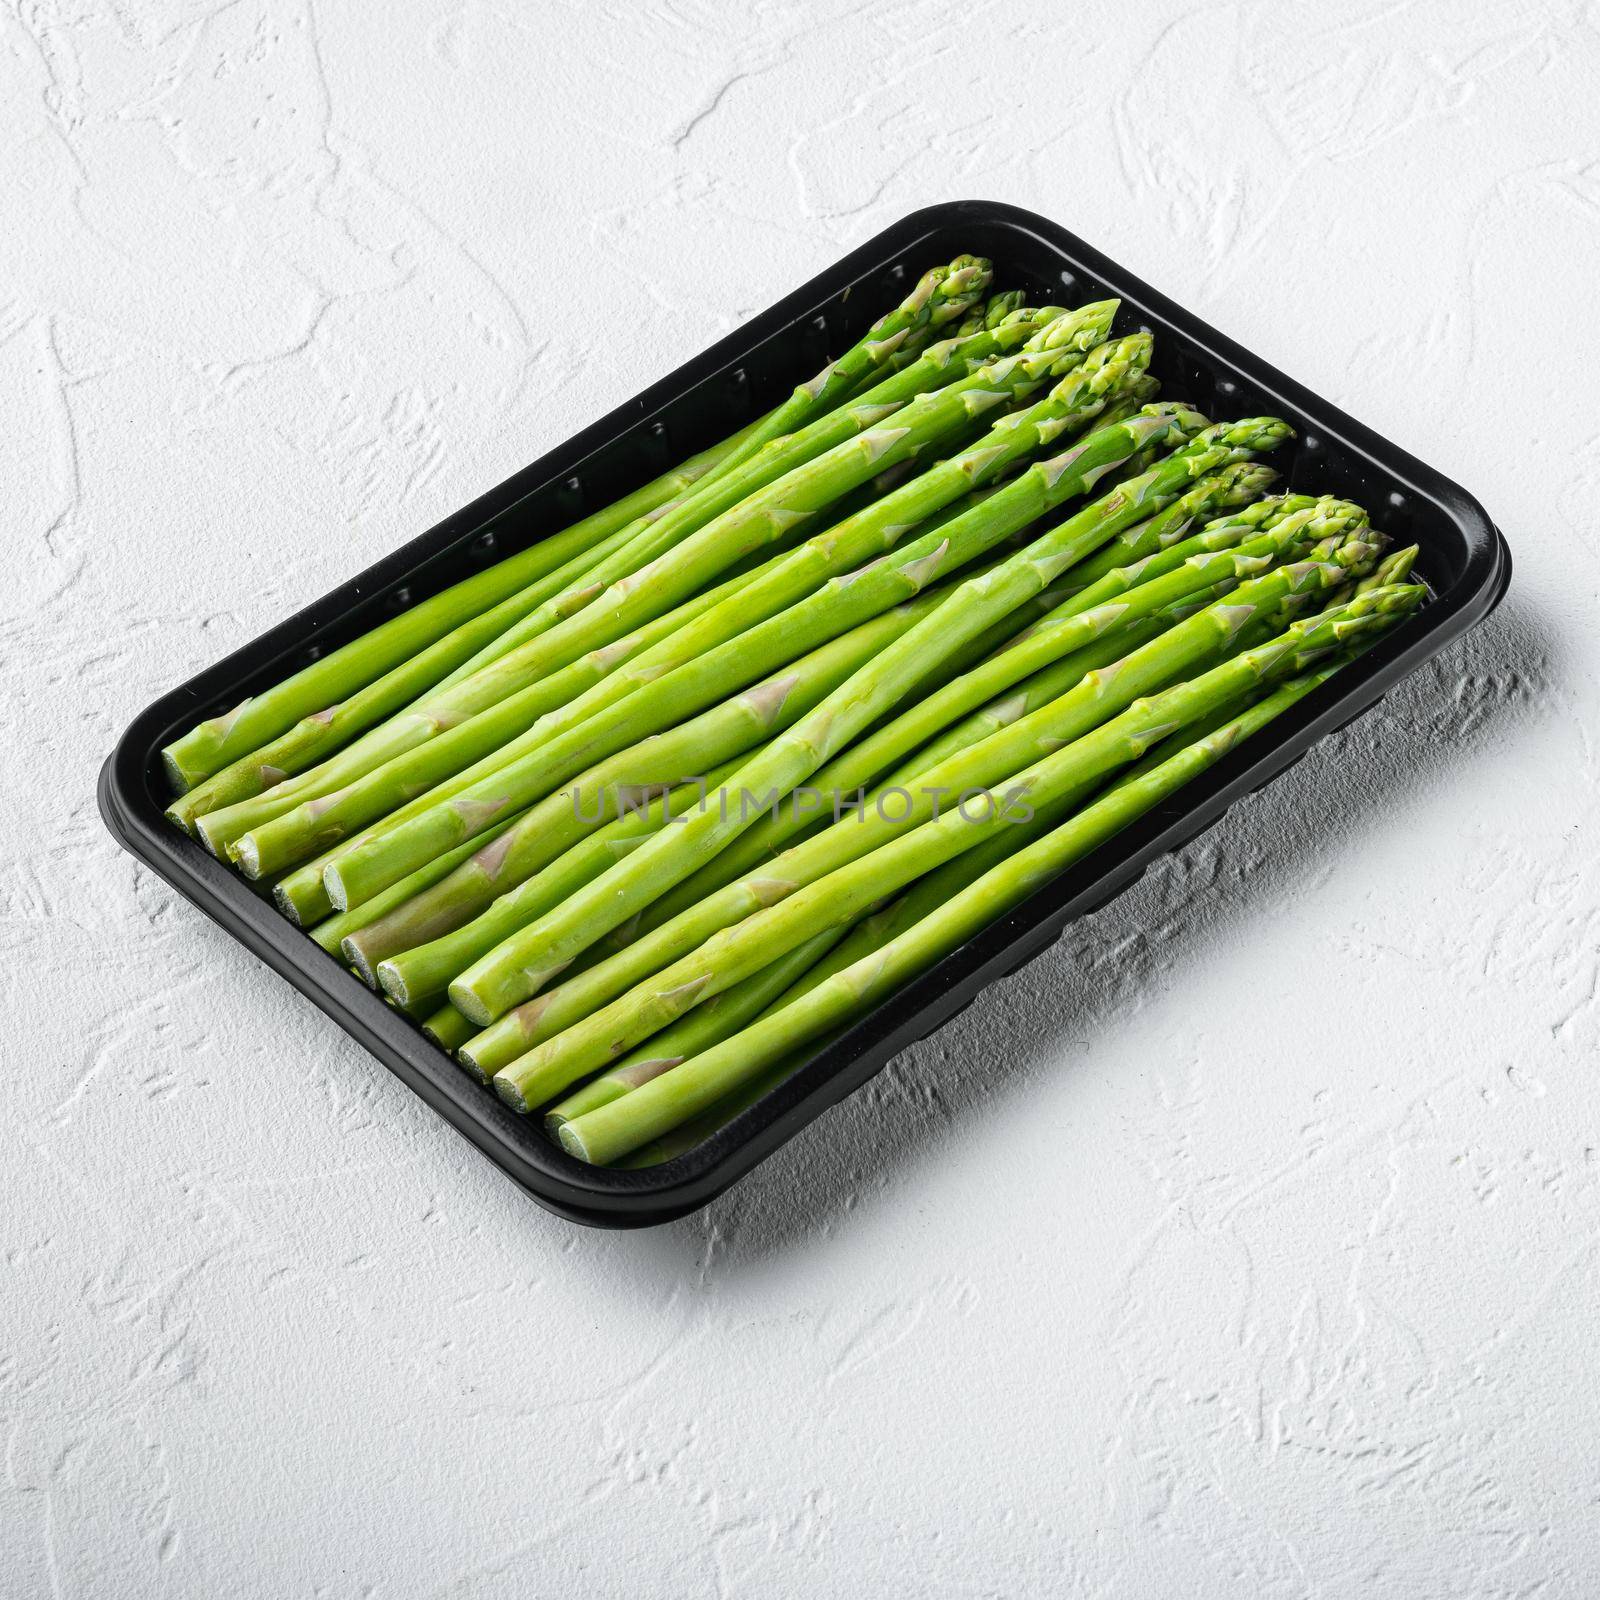 Asparagus. Fresh Asparagus. Pickled Green Asparagus, in plastic market container, on white stone background, square format by Ilianesolenyi